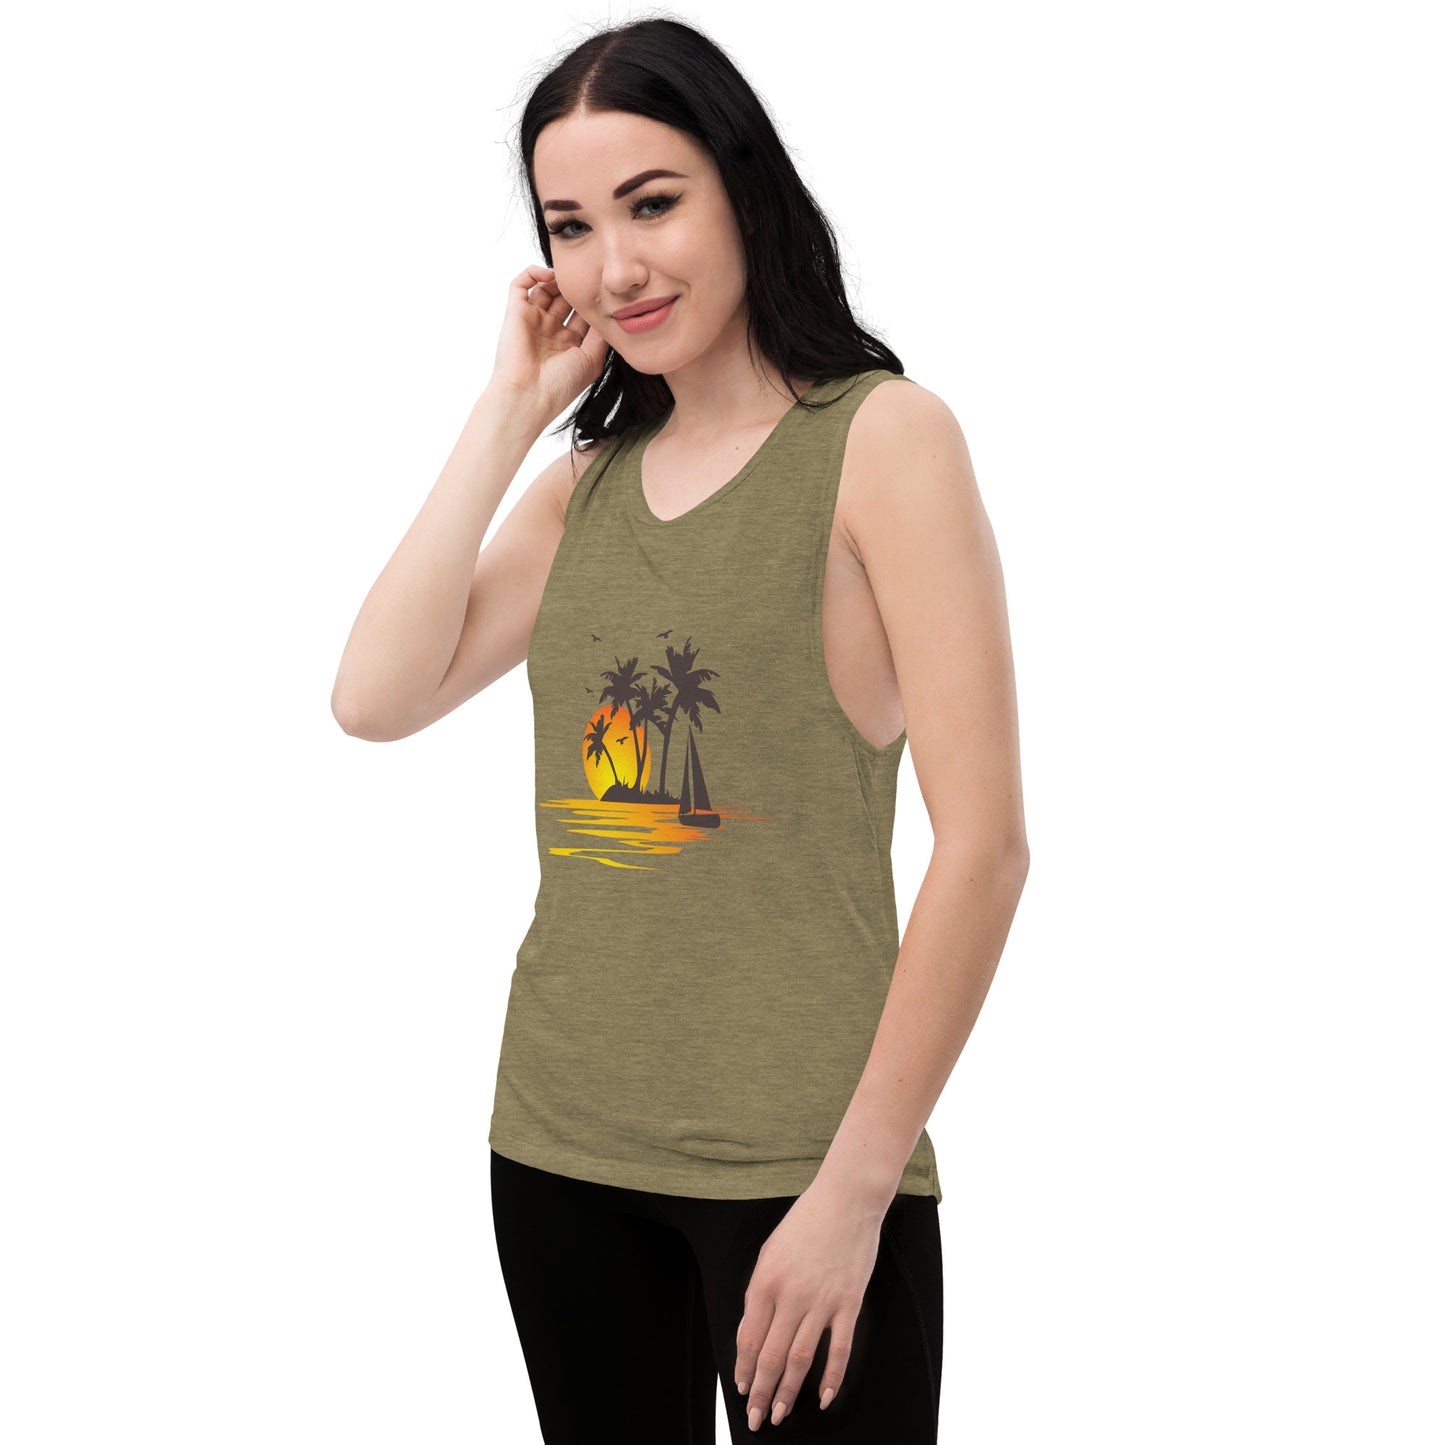 Women with olive muscle tank with a picture of sunset, palm trees and sailboat